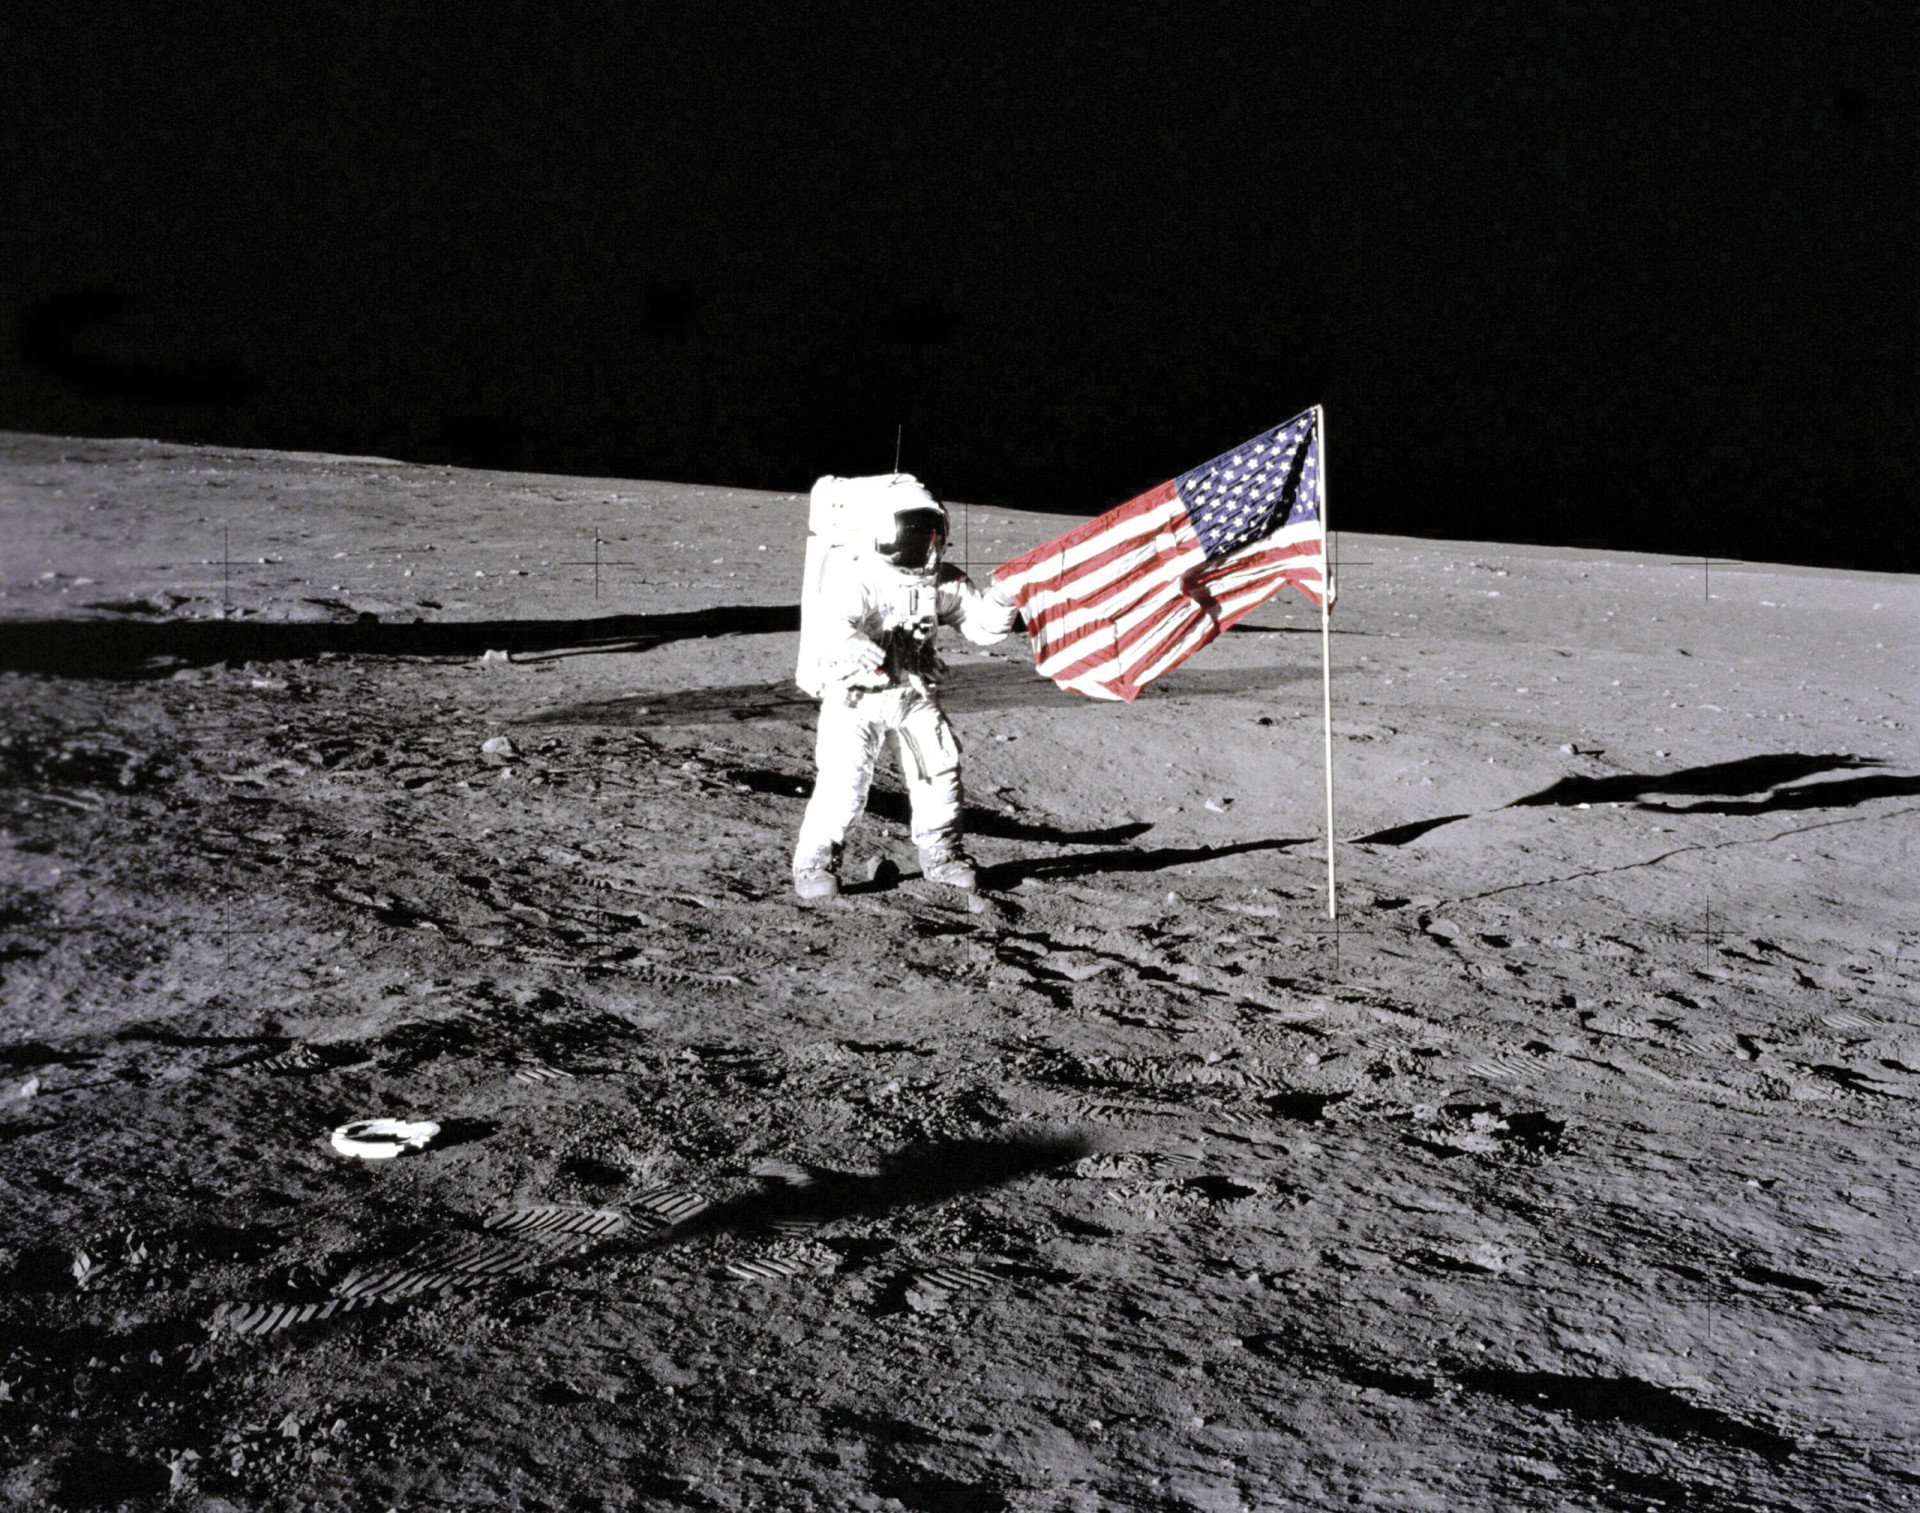 <p>The US focused on winning the Space Race in a much better way: by putting a man on the Moon.</p><p>You may also like:<a href="https://www.starsinsider.com/n/493734?utm_source=msn.com&utm_medium=display&utm_campaign=referral_description&utm_content=713901en-en"> The brutal ways Jesus' disciples died</a></p>